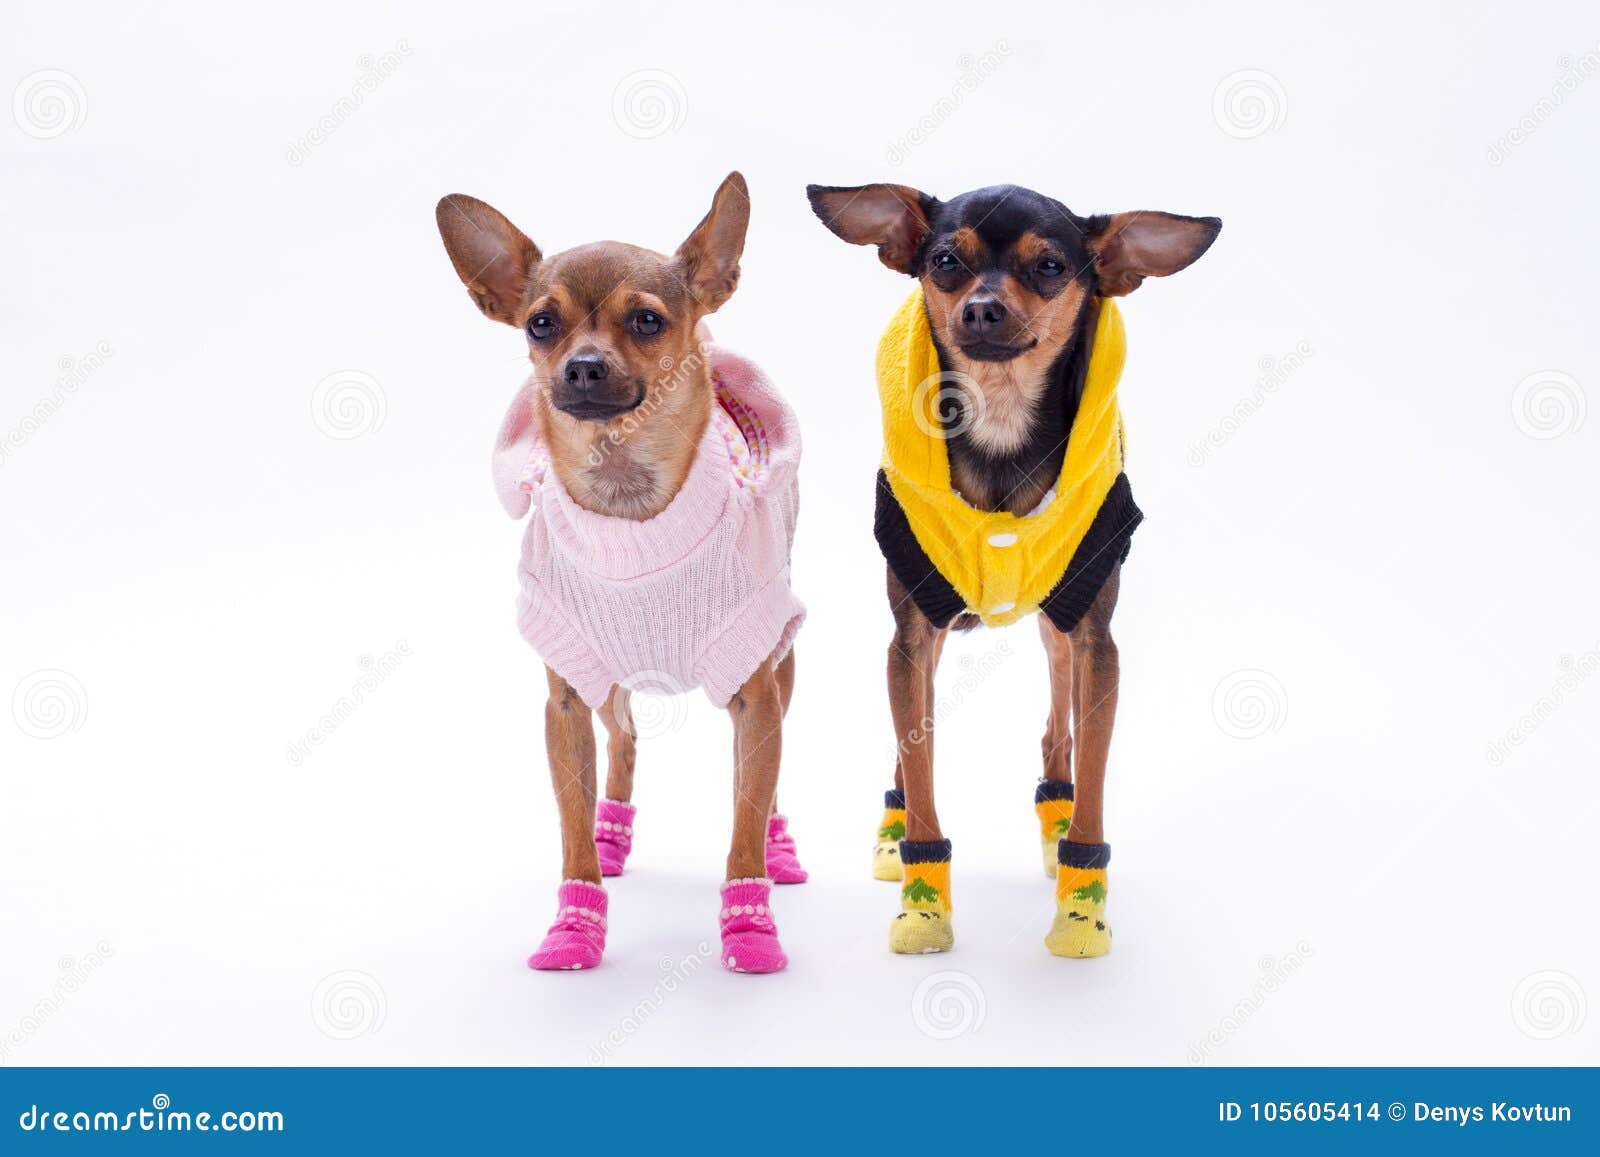 Russian Toy Terrier And Chihuahua Stock Photo Image Of Couple Apparel 105605414